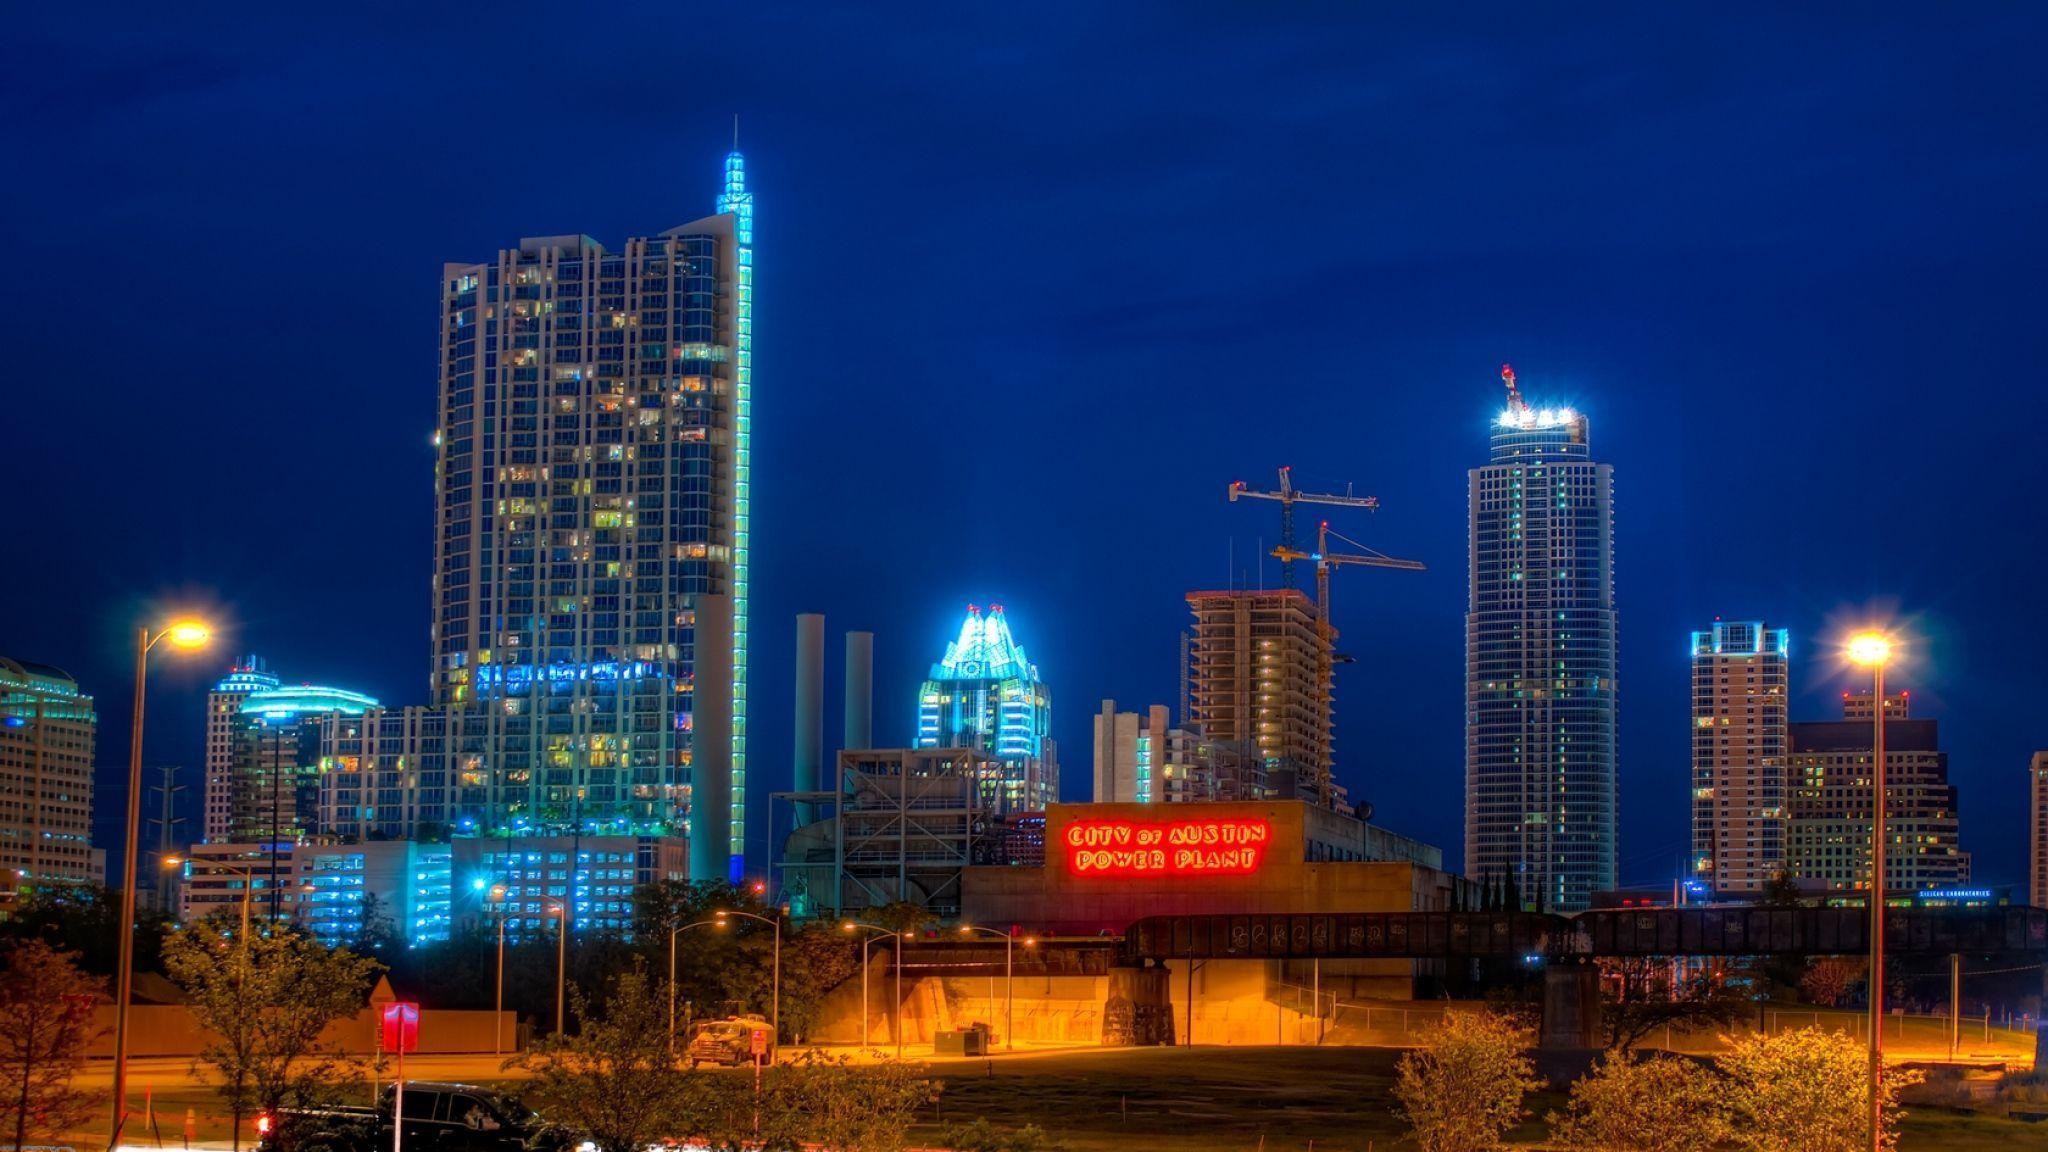 Austin: The city has adopted "Silicon Hills" as a nickname in the 1990s. 2050x1160 HD Wallpaper.